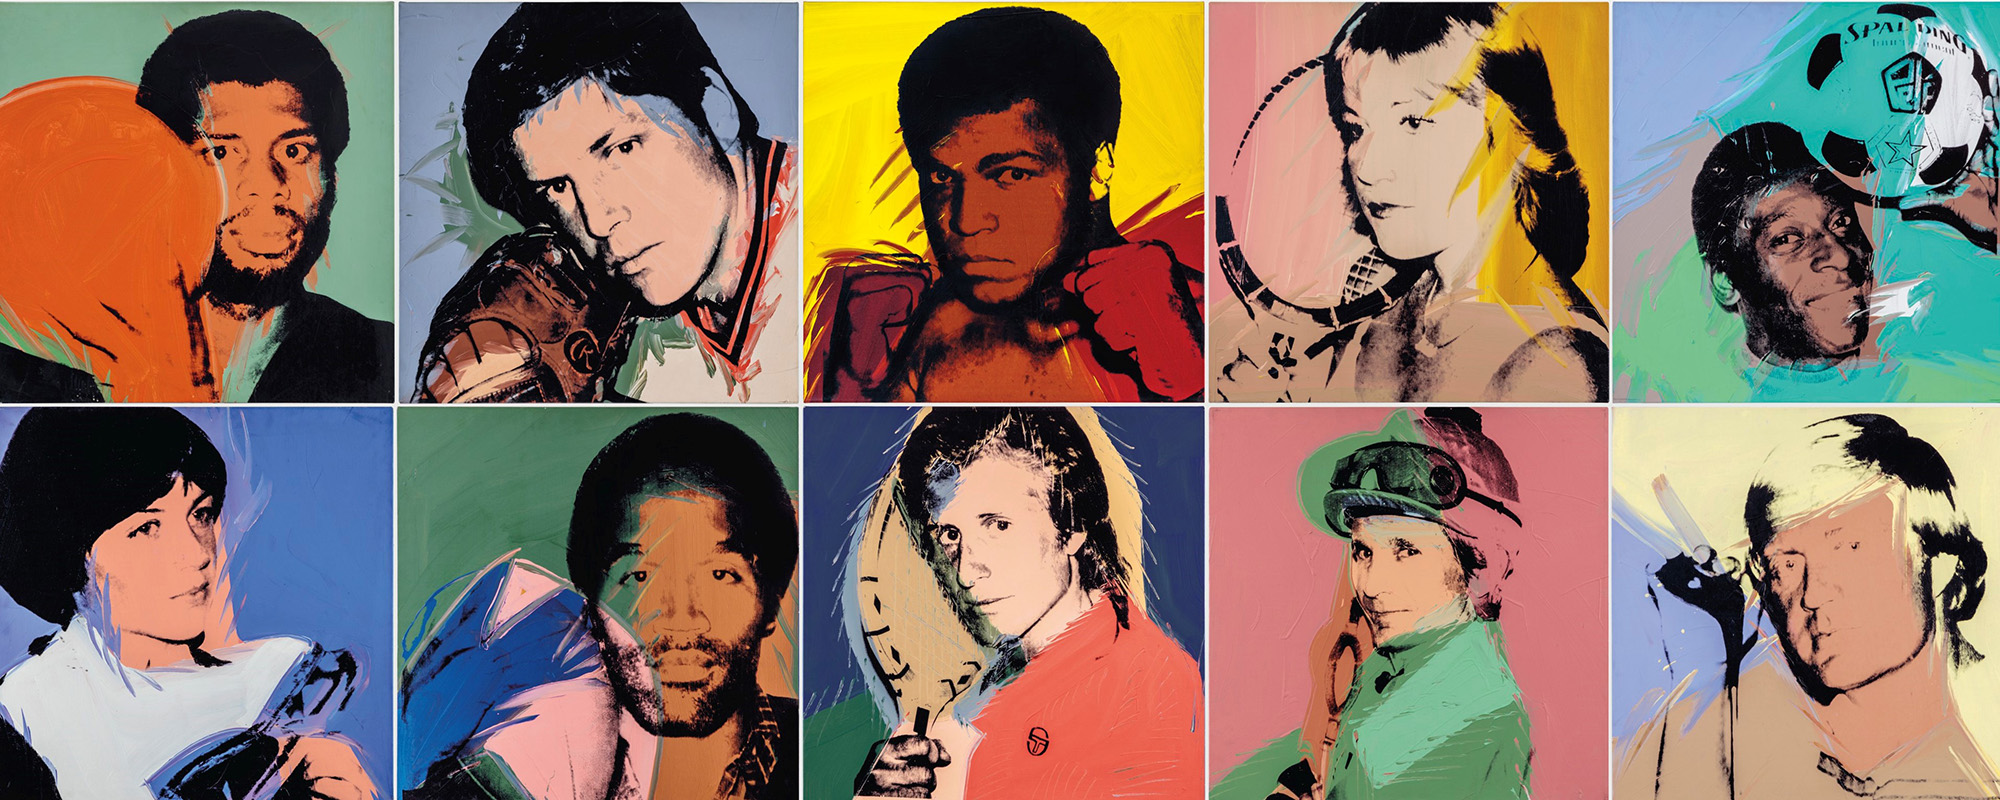 Andy Warhol portrait of OJ Simpson to be auctioned in New York - BBC News